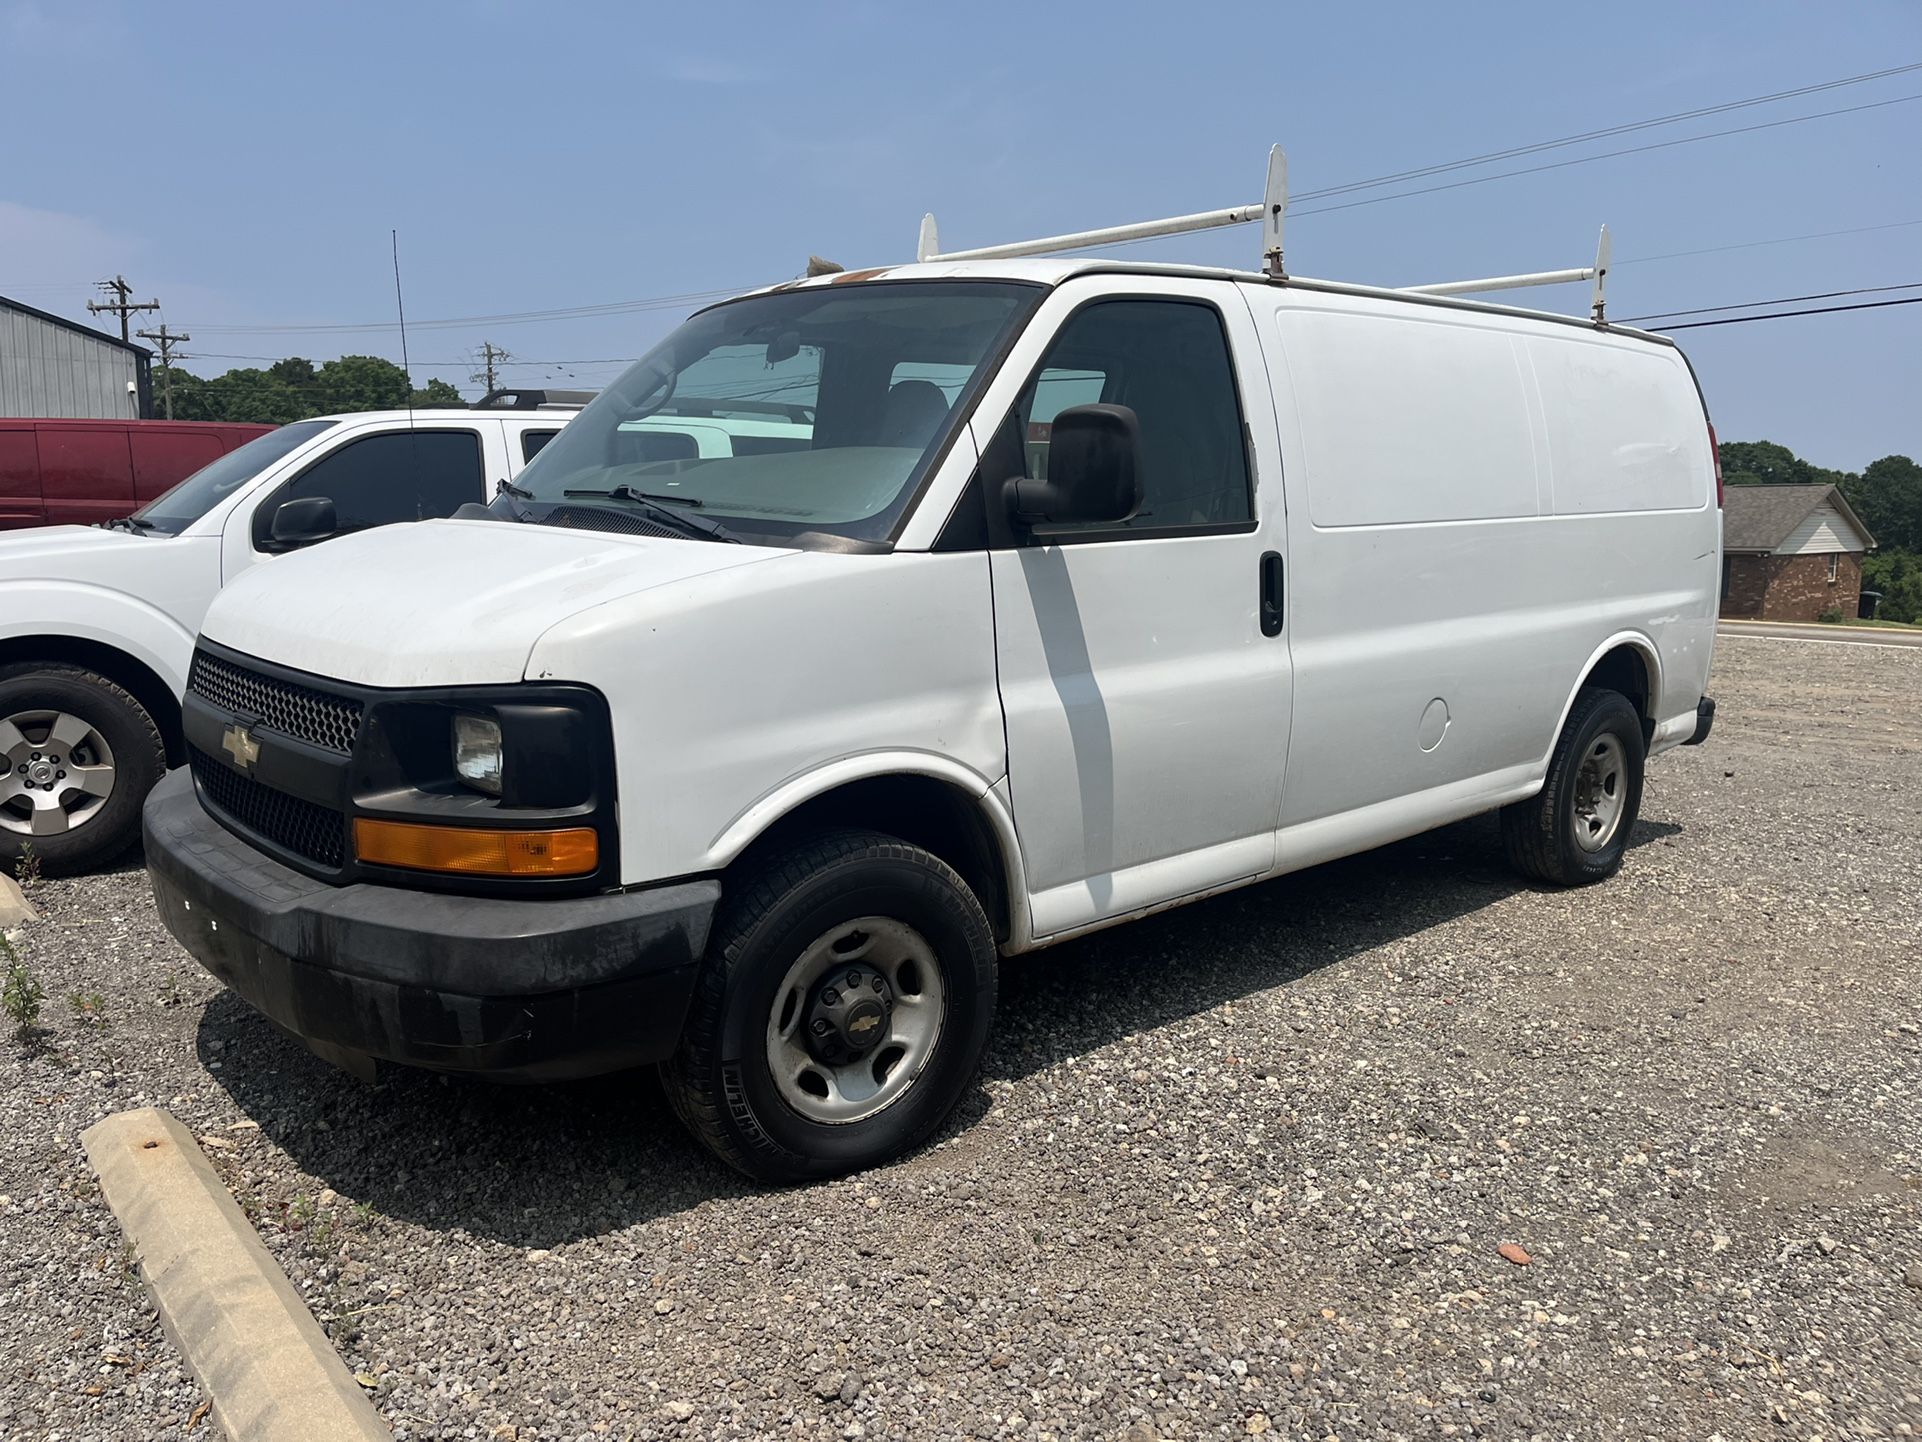 Chevy Express 